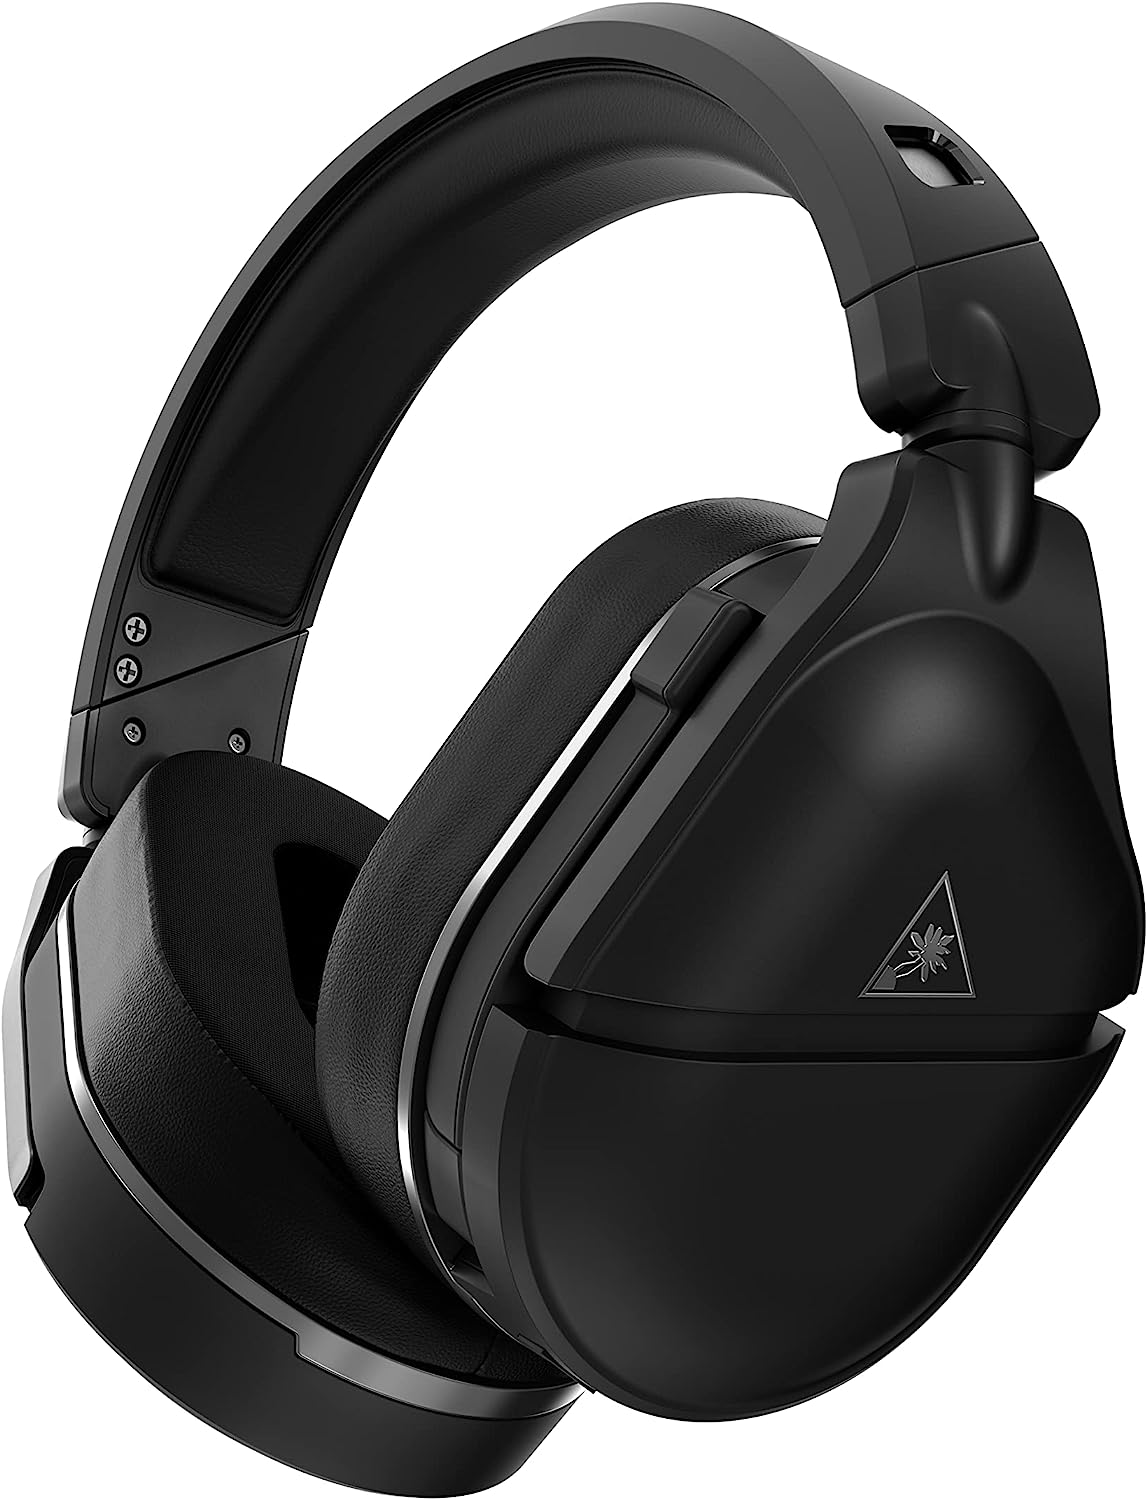 Turtle Beach Stealth 700 Gen 2 MAX for PS4 & PS5 - Black - Excellent